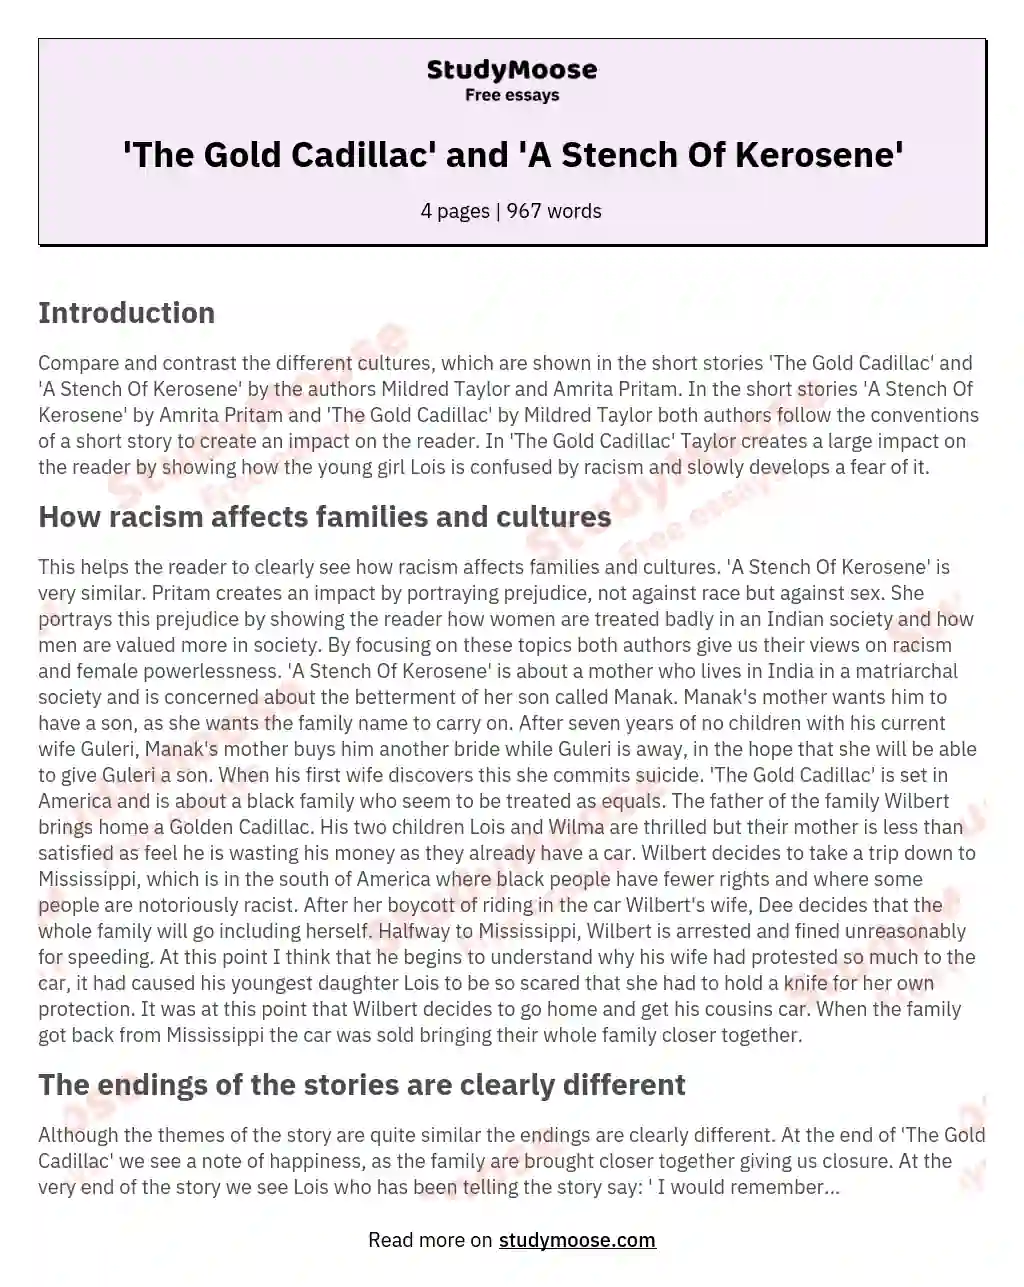 'The Gold Cadillac' and 'A Stench Of Kerosene' essay